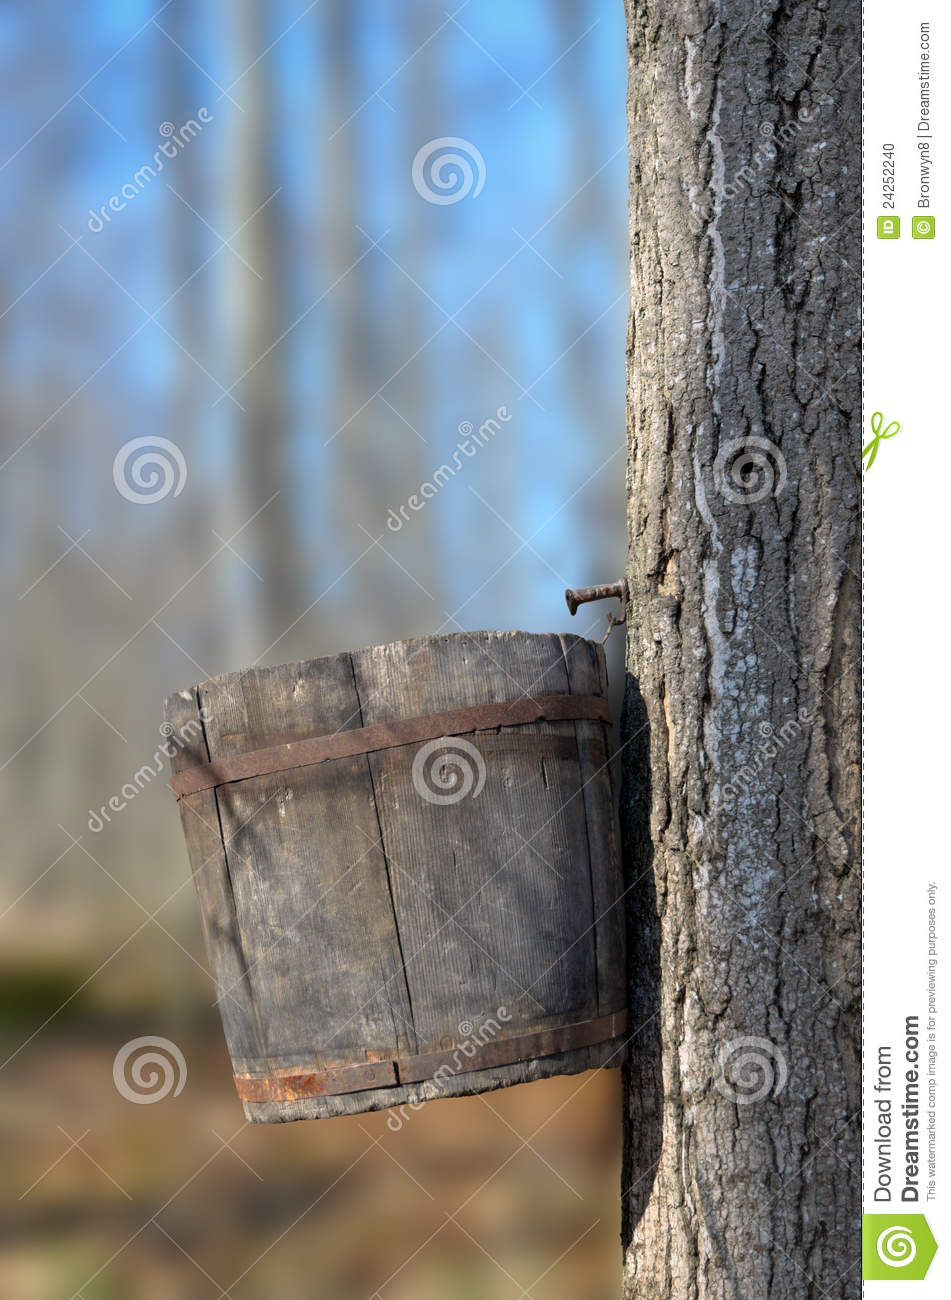 Wood Bucket On Maple Tree To Collect Sap For Making Sugar